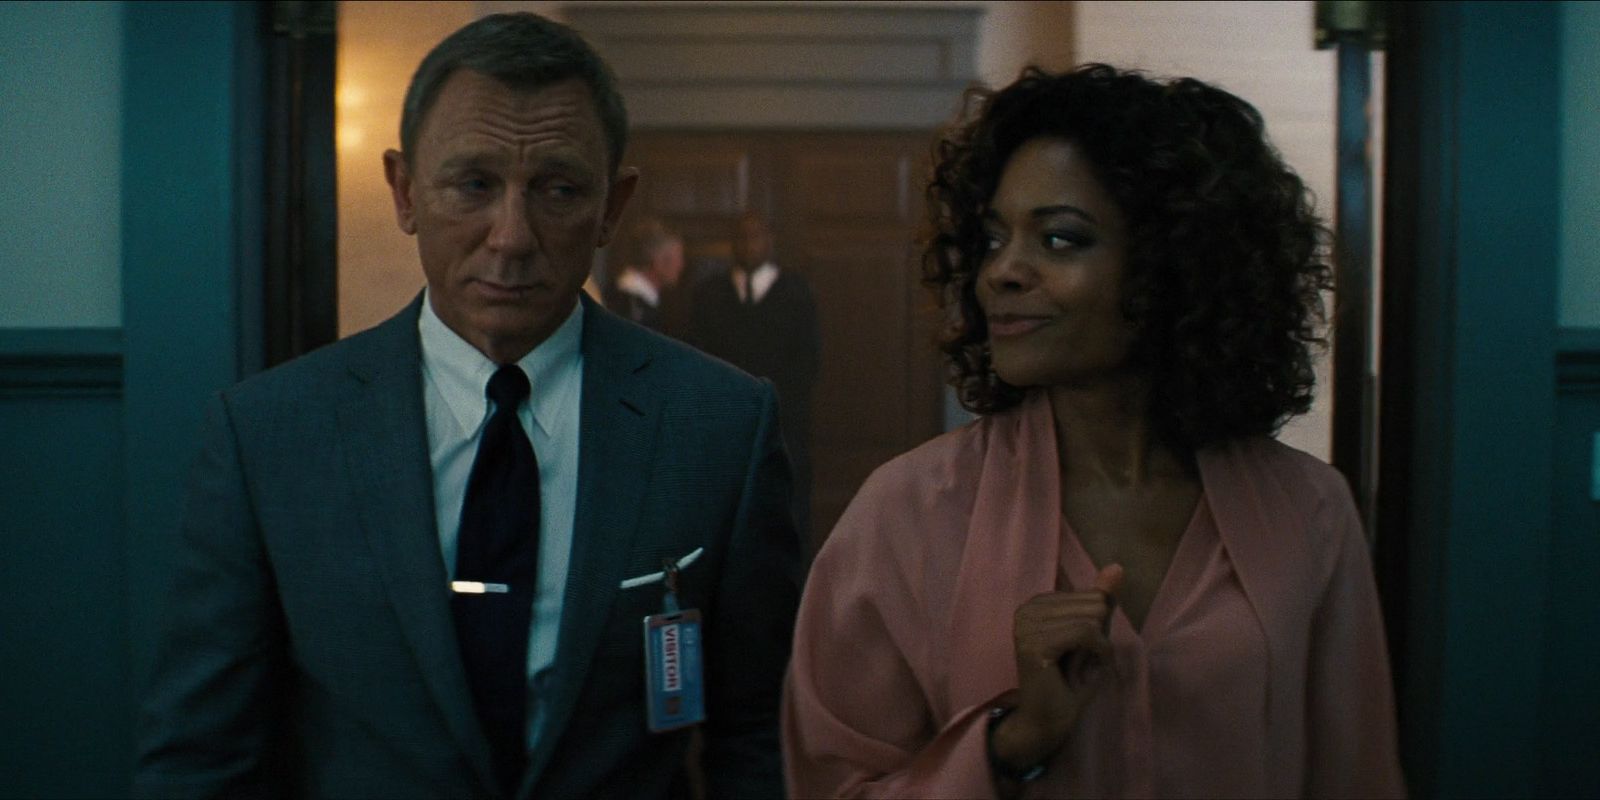 Daniel Craig as James Bond and Naomie Harris as Moneypenny in No Time To Die